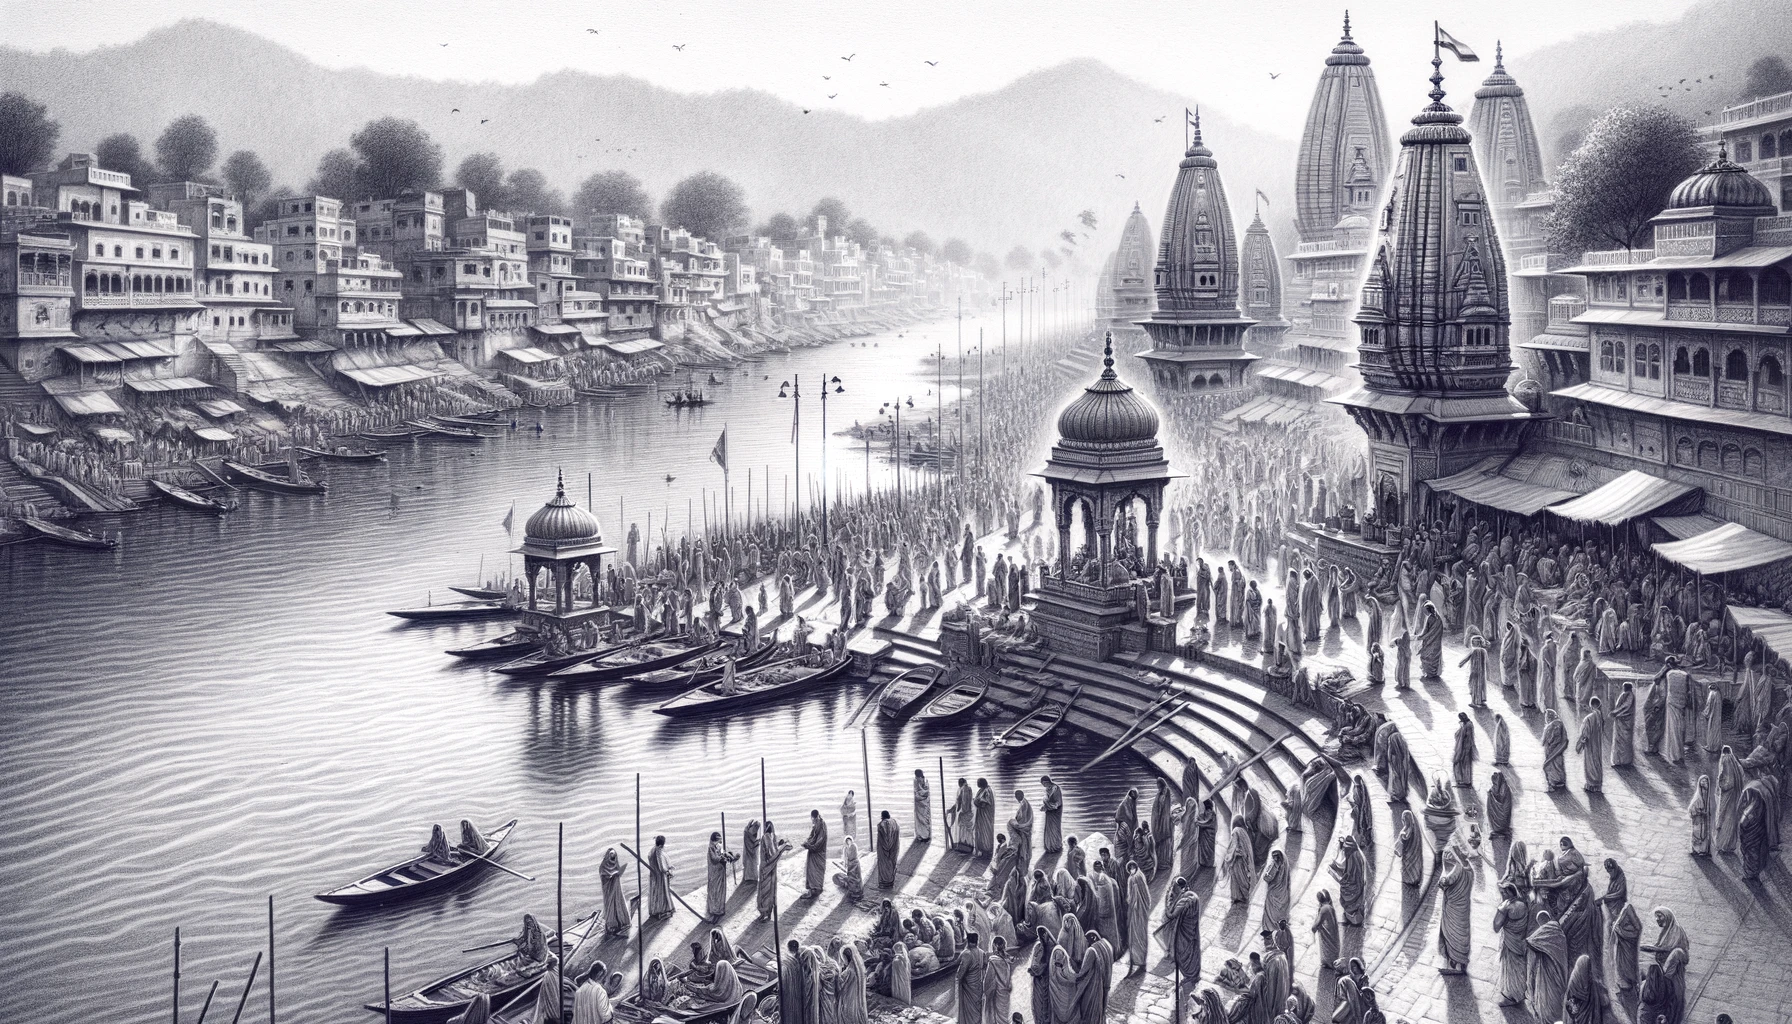 Haridwar: A Confluence of Divine and Earthly Realms